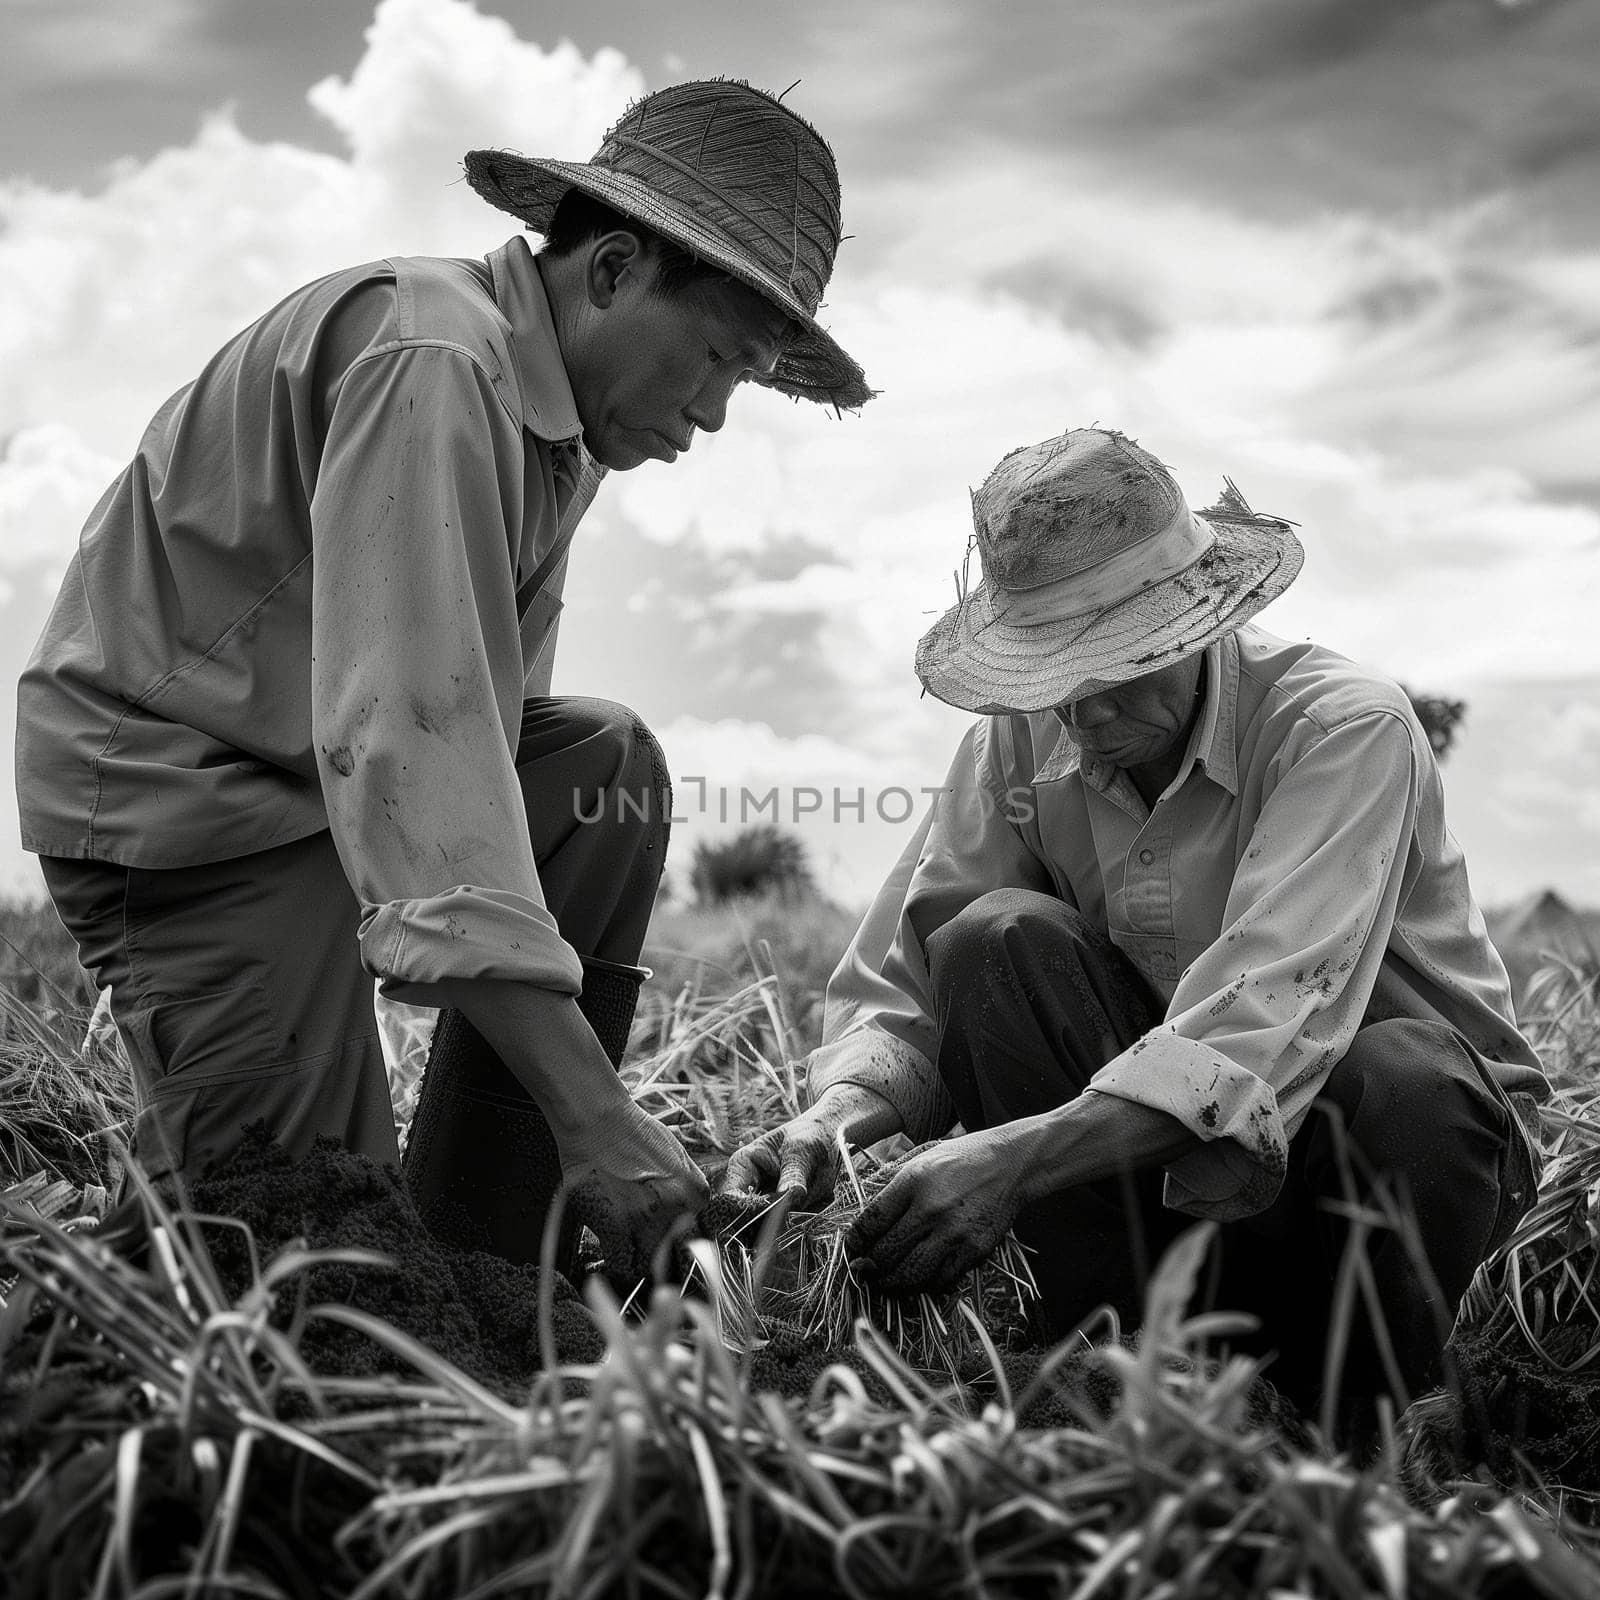 Friendship and teamwork in the fields during planting and harvesting. Friendship between two men. Friendship between two children. Black and white image. High quality photo